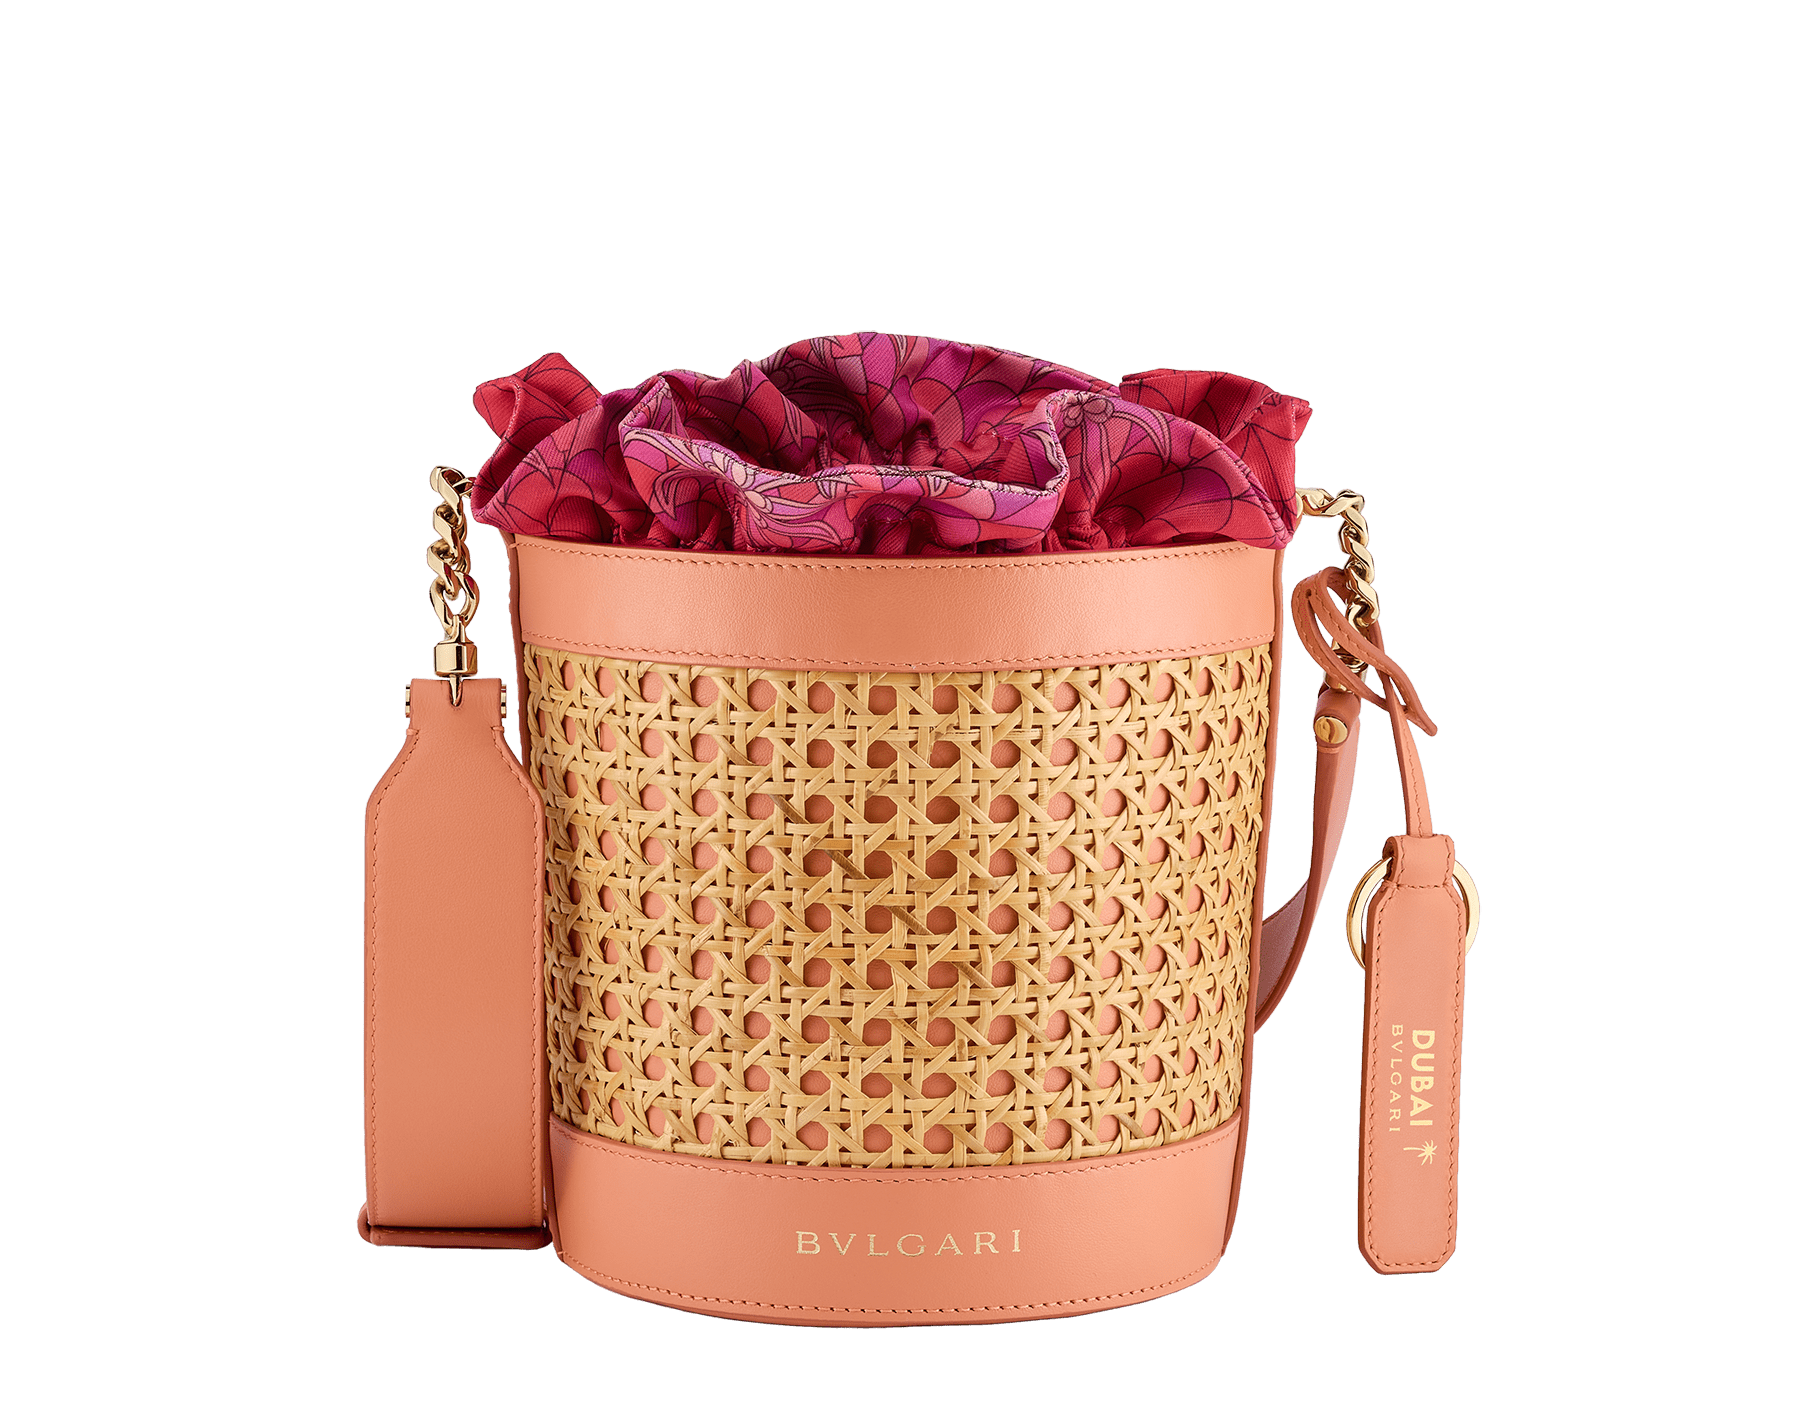 Serpenti Forever medium bucket bag in natural Vienna straw with coral carnelian orange calf leather details and customisable tag with hot stamped "Dubai" inscription on one side. Detachable satin satchel with multicoloured print outside, beetroot spinel fuchsia inside, and drawstring closure with captivating snakeheads in light gold-plated brass. Special Resort Edition exclusive to Dubai. 292453 image 1